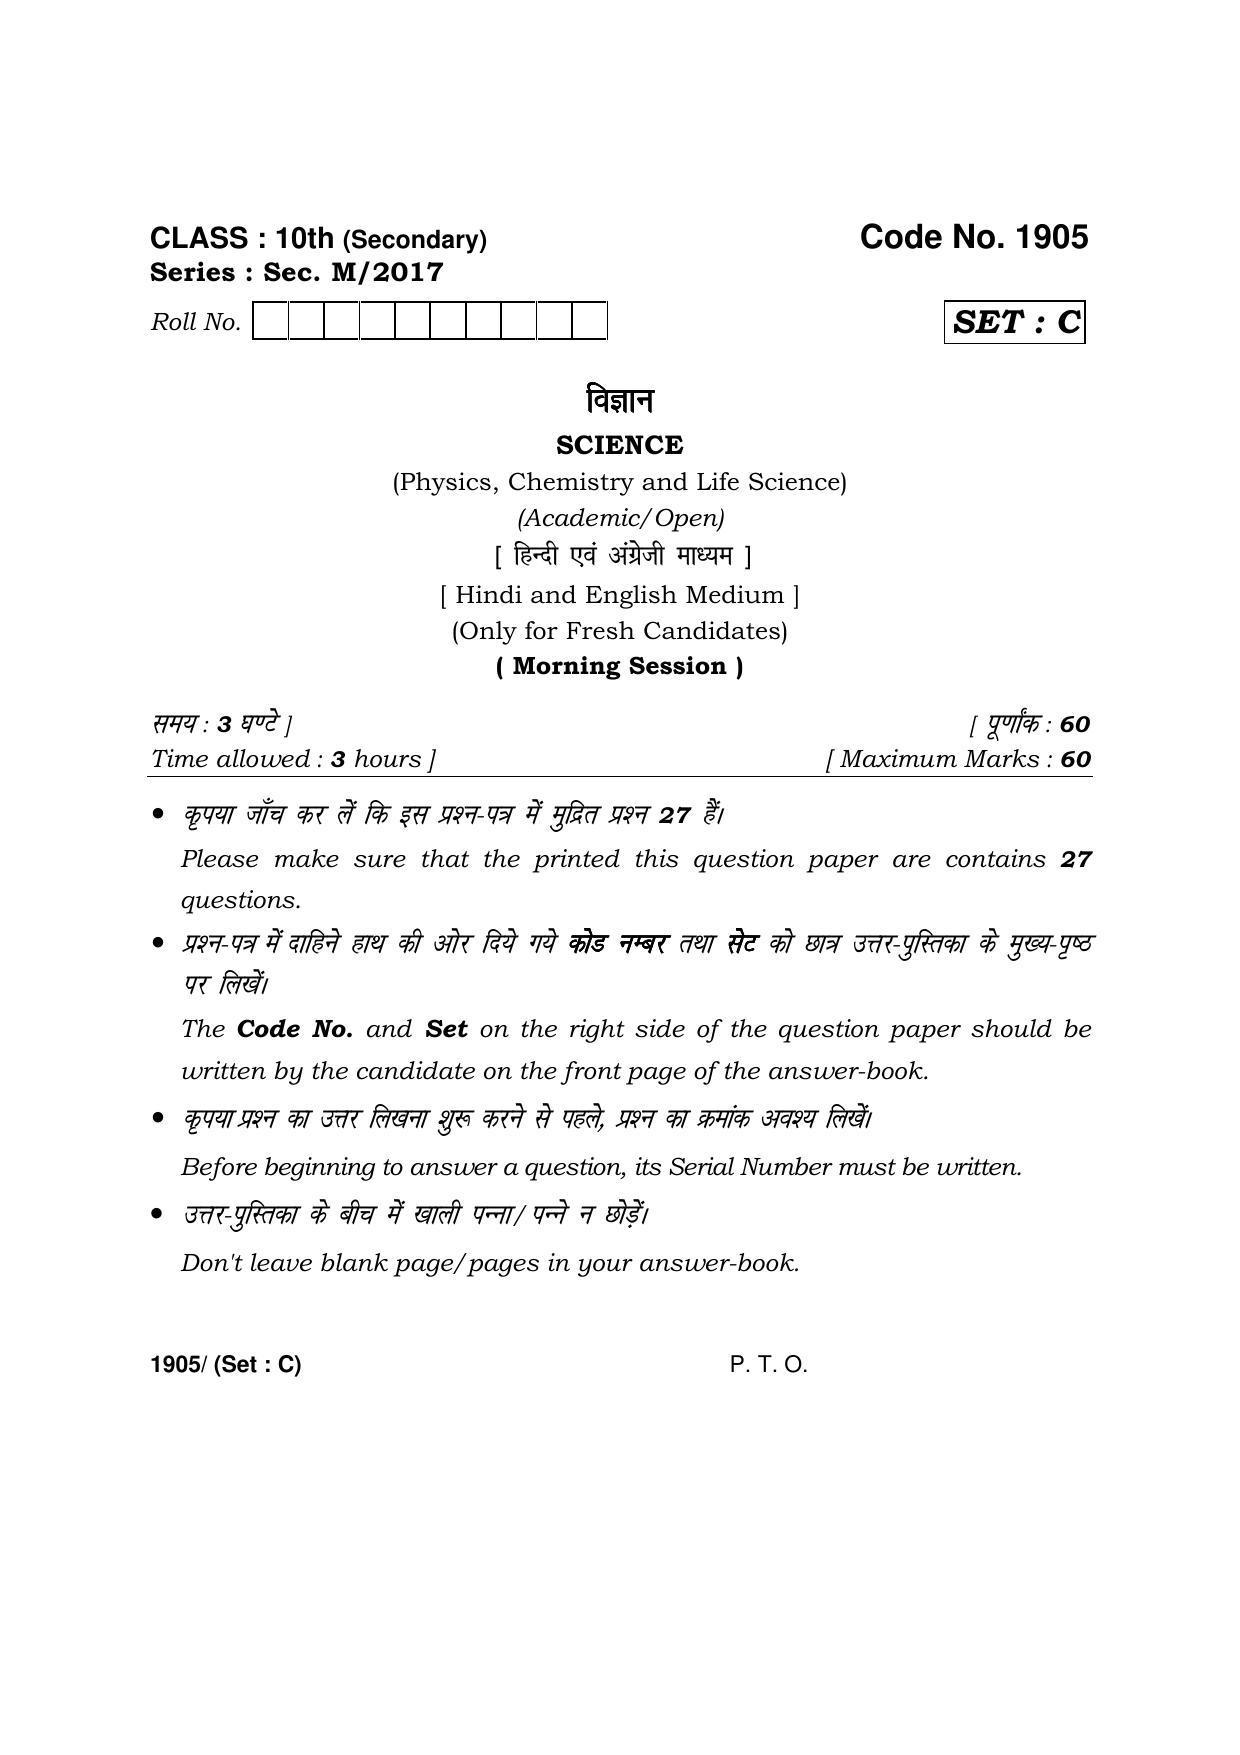 Haryana Board HBSE Class 10 Science -C 2017 Question Paper - Page 1